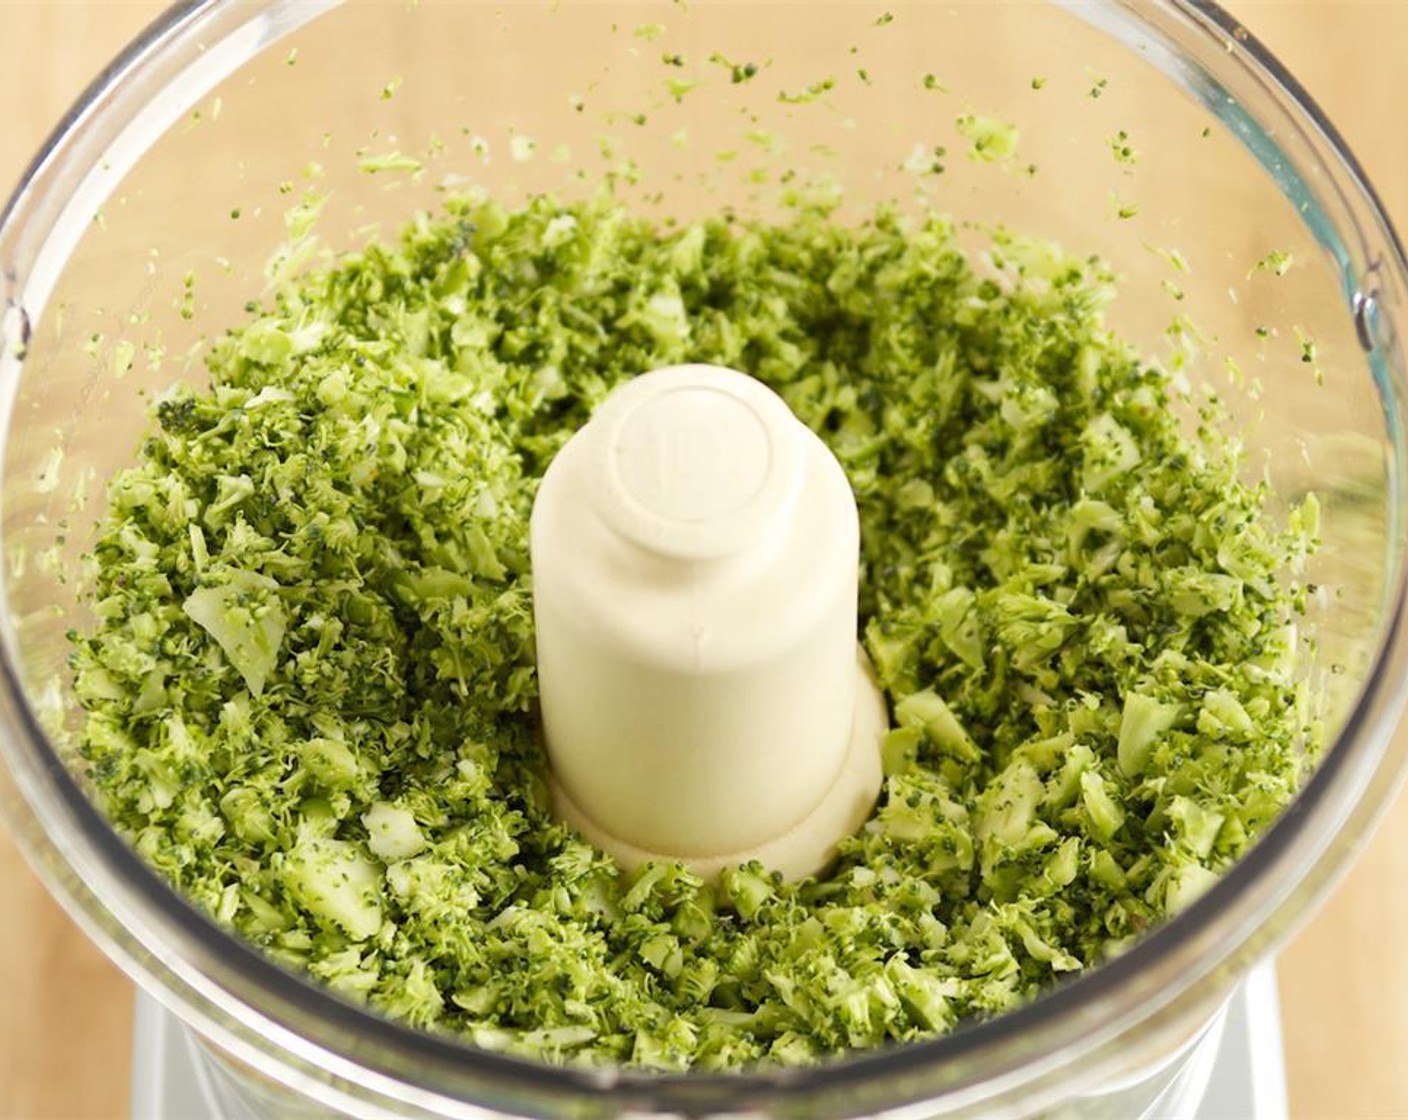 step 2 Place the broccoli crowns and peeled stems in a food processor fitted with a chopping blade and pulse in 2 batches until small bite-sized pieces remain. Set aside in a big bowl.